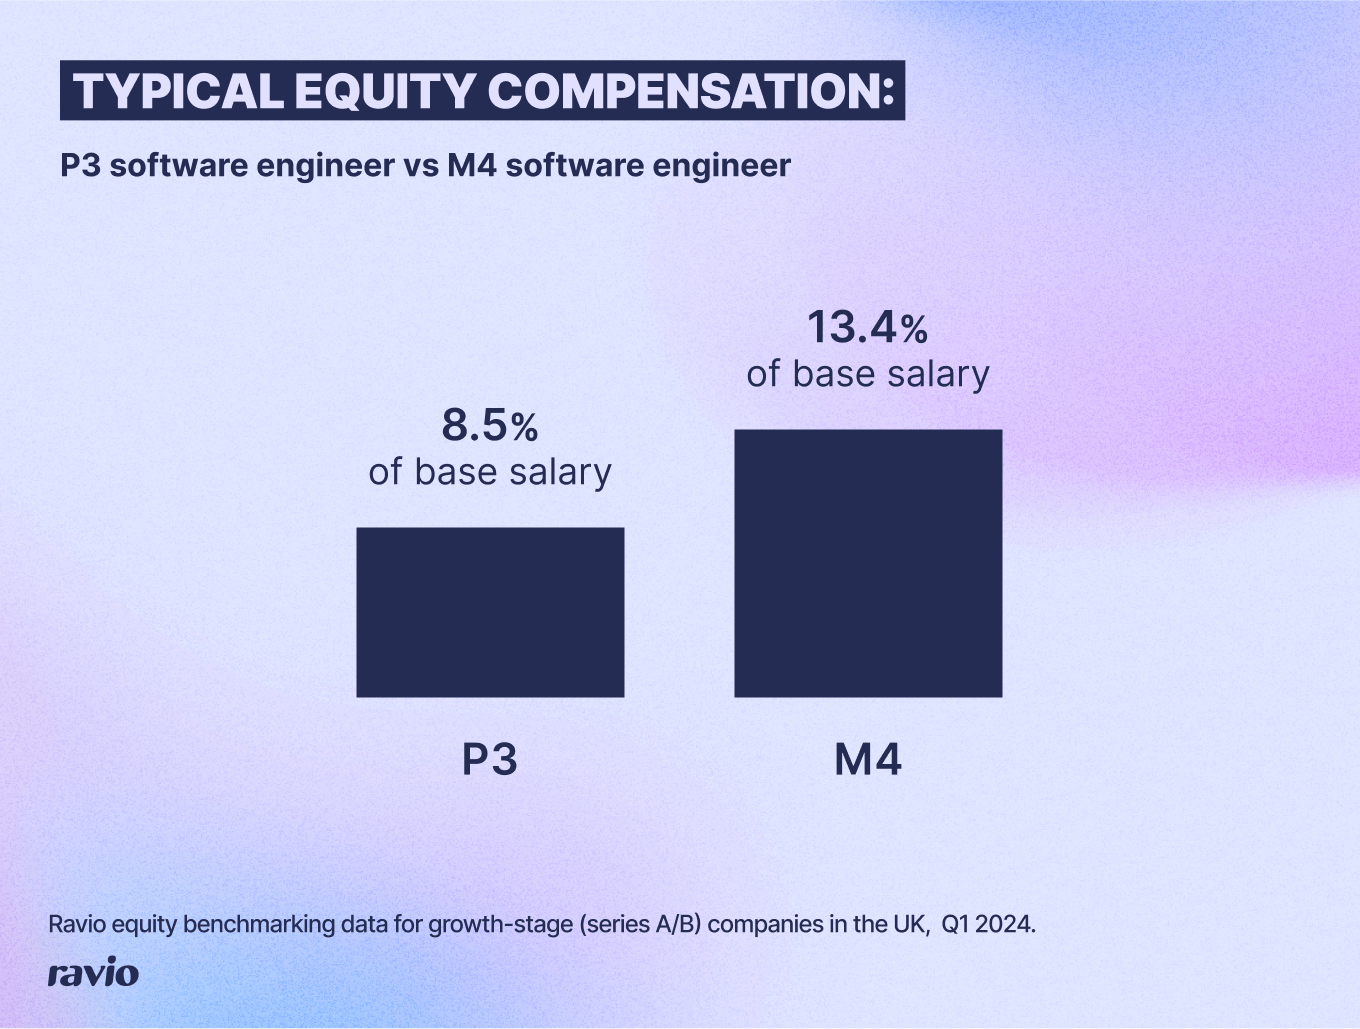 A typical equity offer for a P3 software engineer is 8.5% of base salary, whereas for an M4 software engineer it is 13.4% of base salary